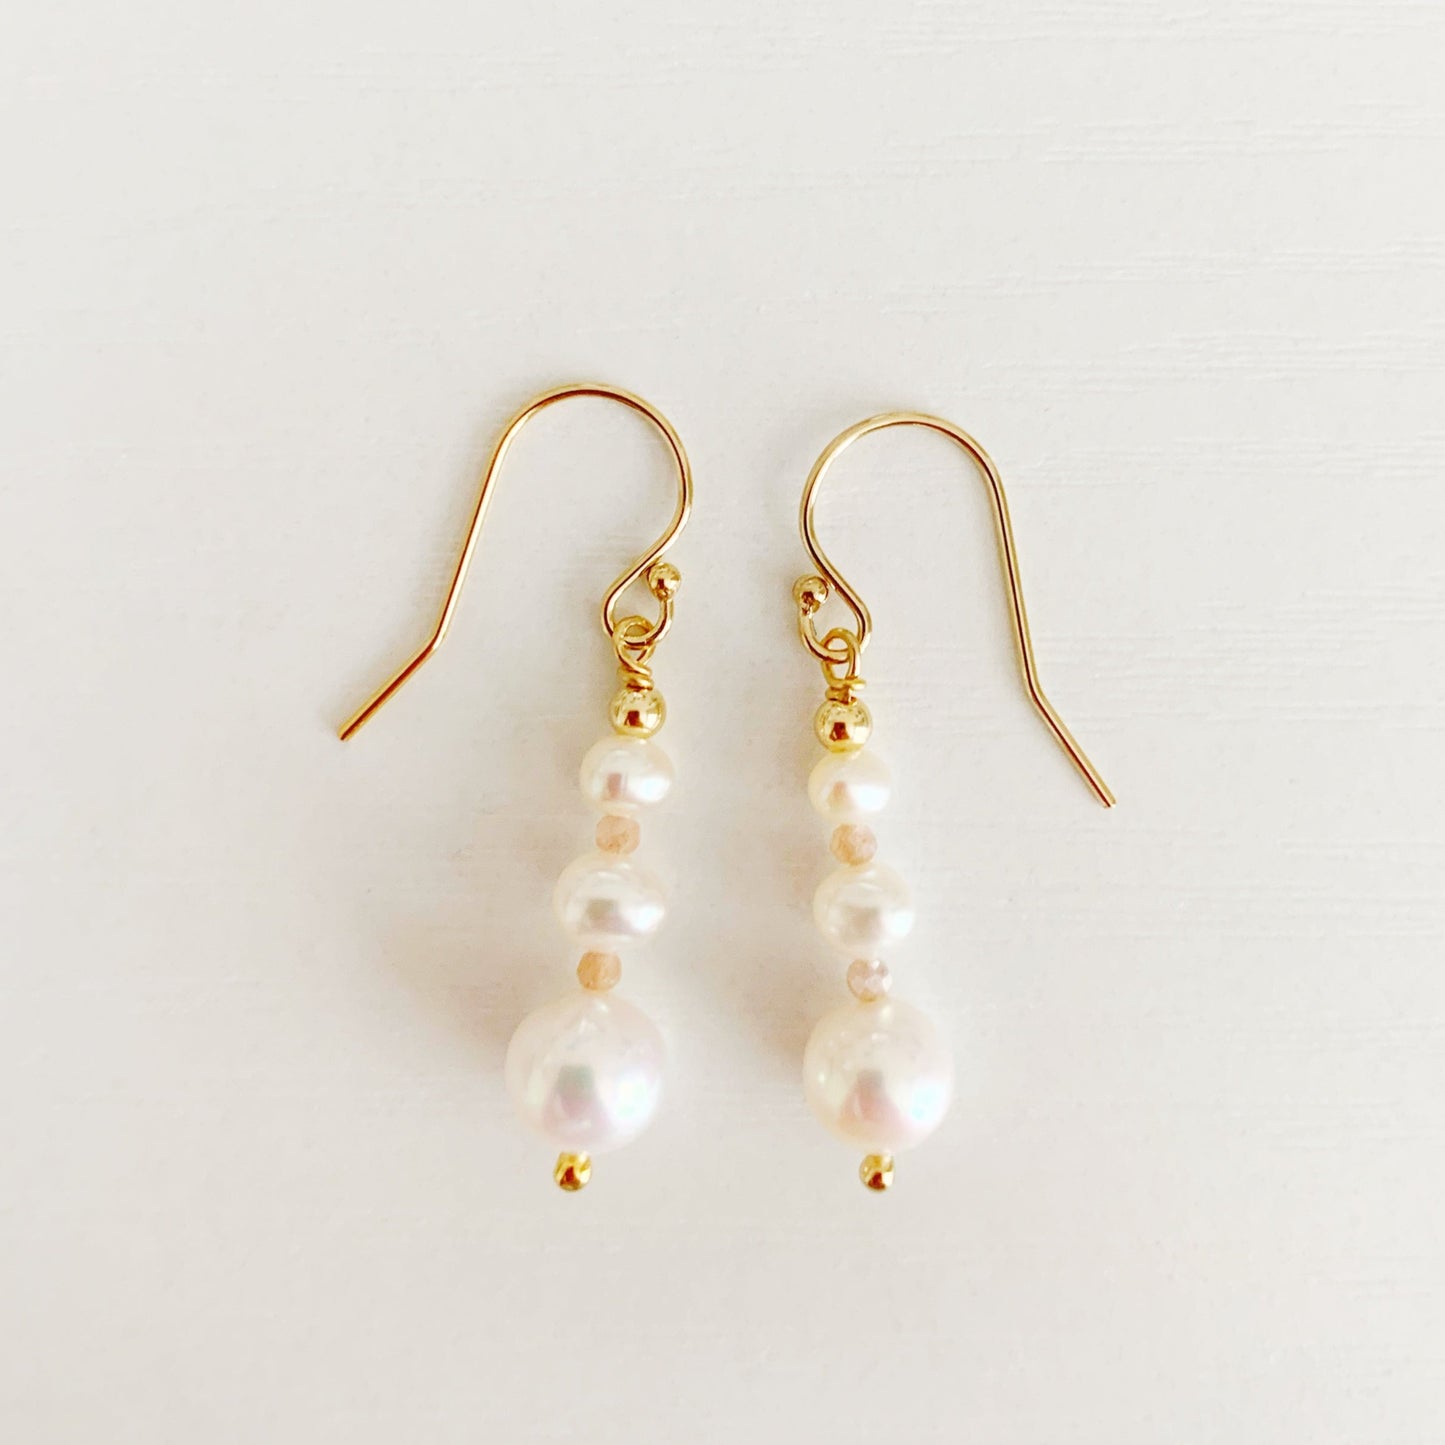 barrington earrings by mermaids and madeleines feature freshwater pearls in a linear taper with peach moonstone accents and 14k gold filled findings. this pair is photographed flat on a white surface